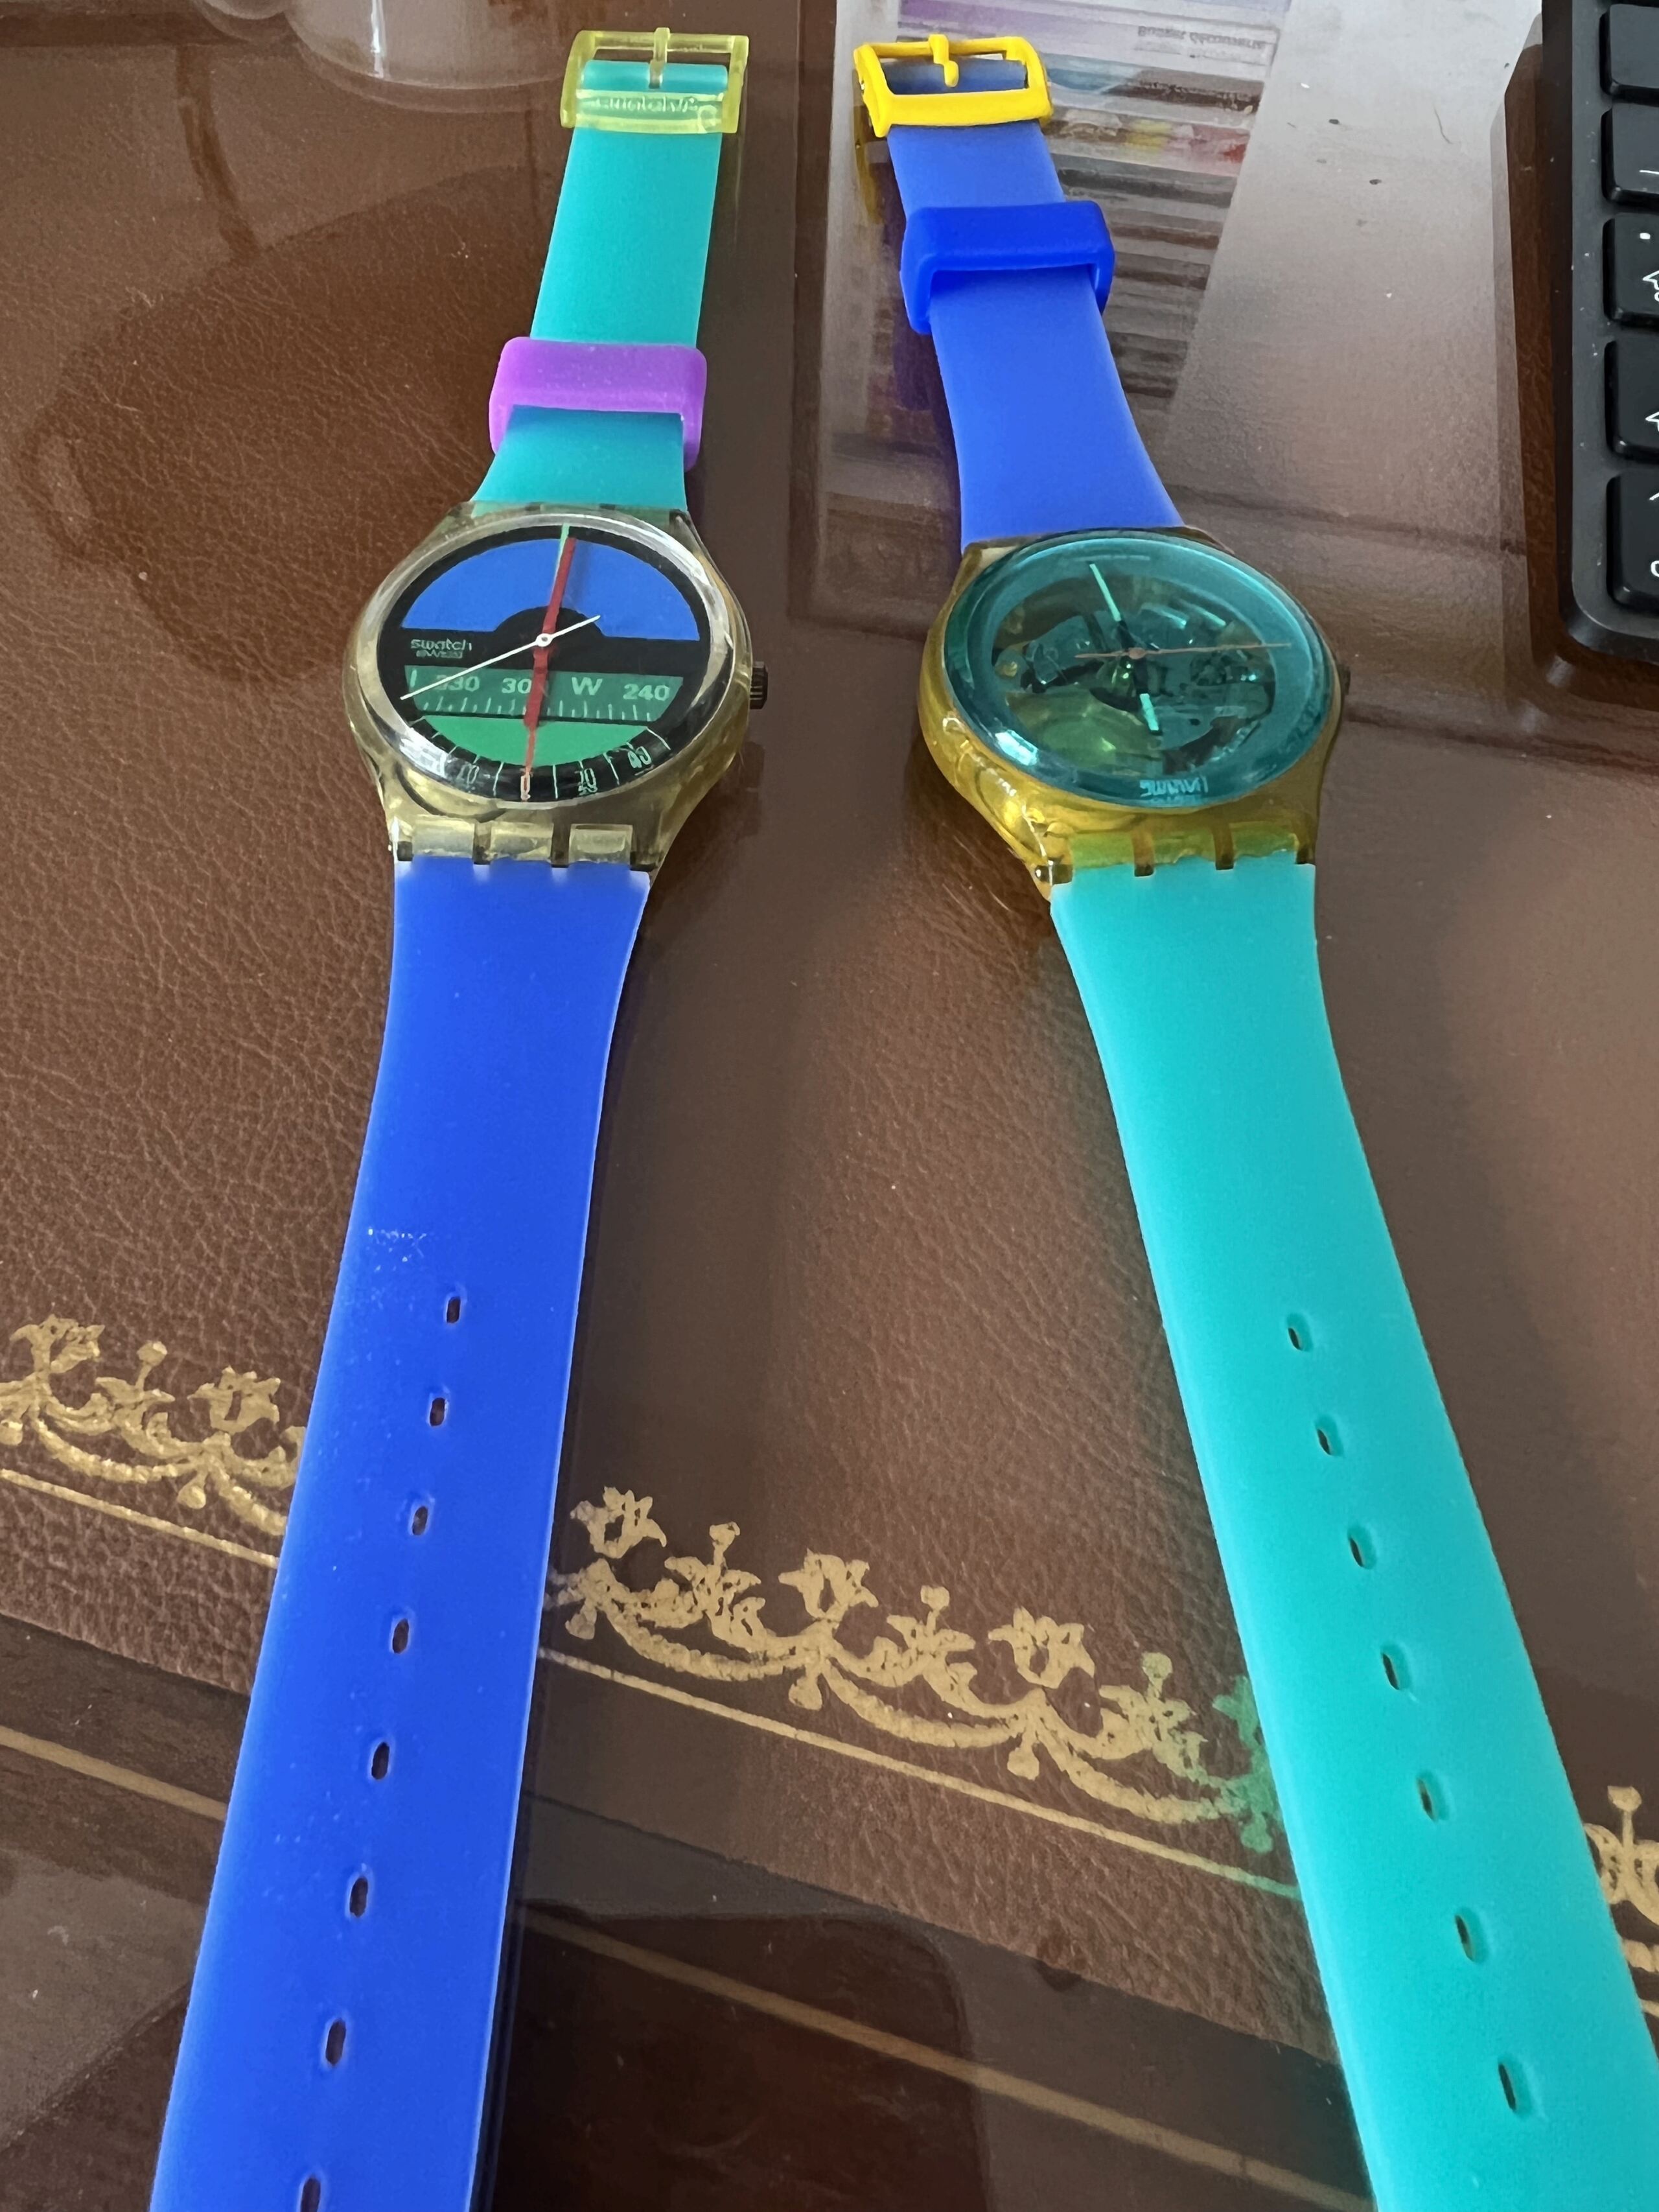 SWATCH, Vraiment jetable? - Page 2 Img_5813